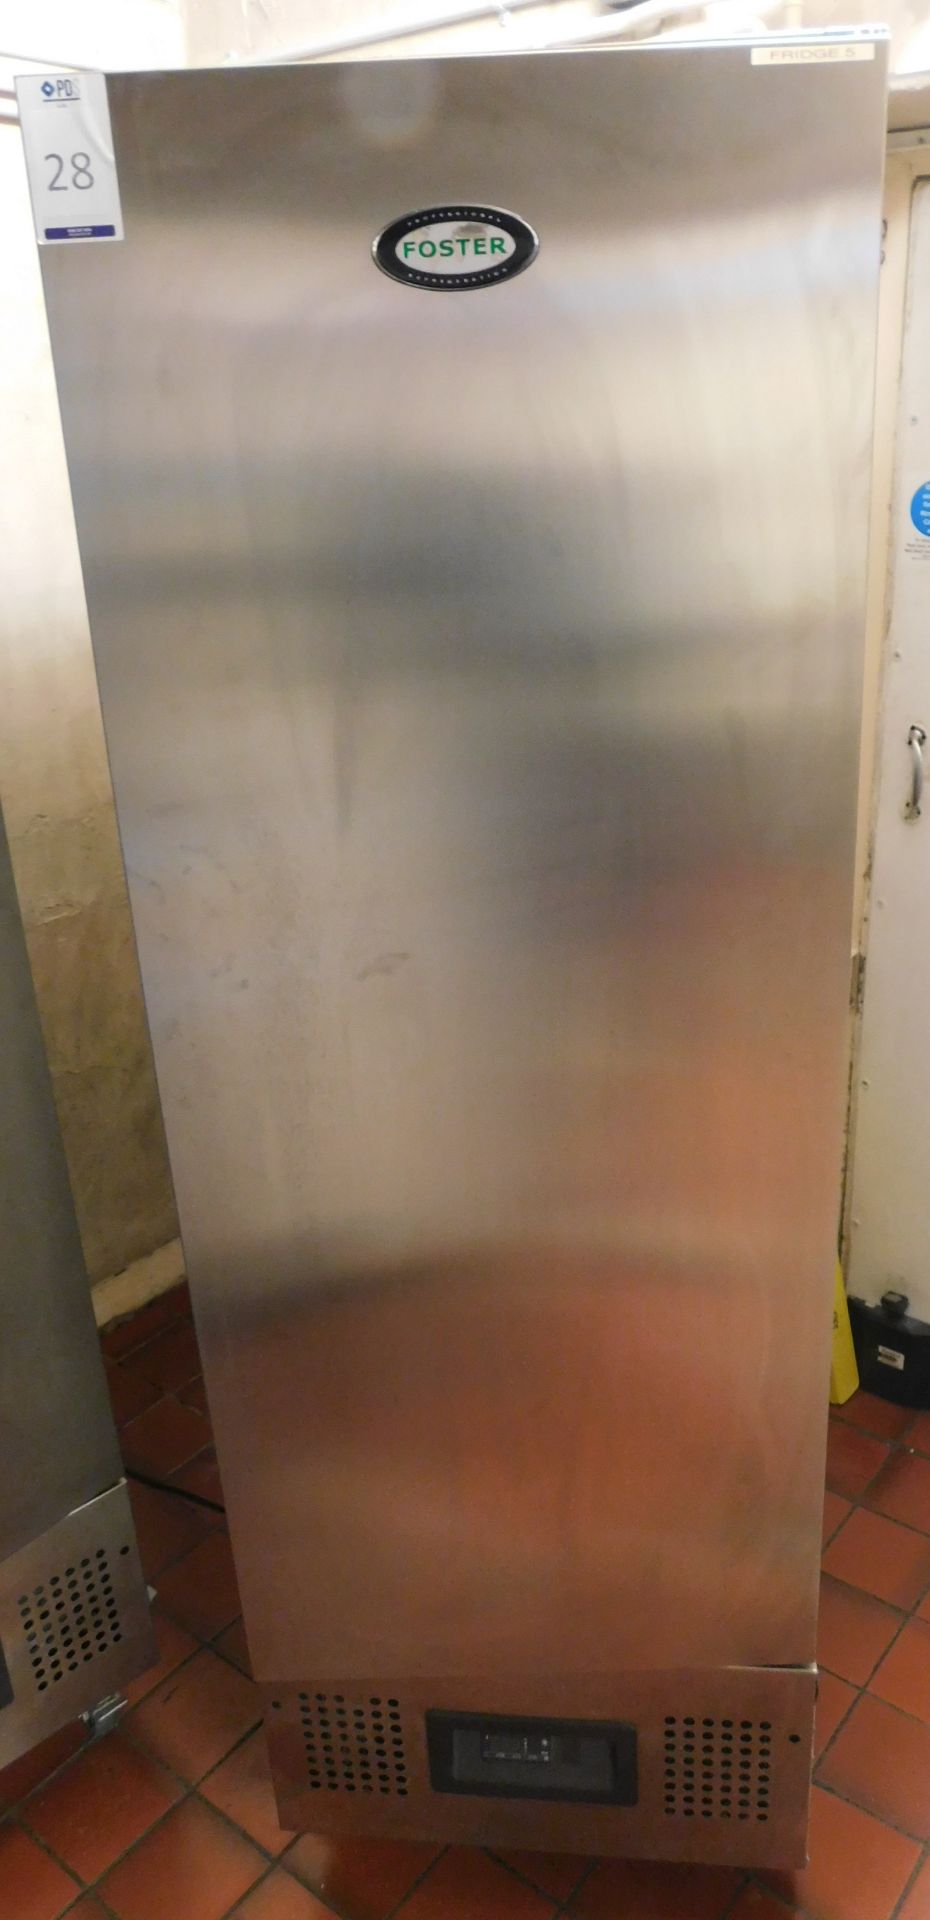 Foster FSL400H Stainless Steel Upright Refrigerator, Serial Number E5349785 (Location Bloomsbury -